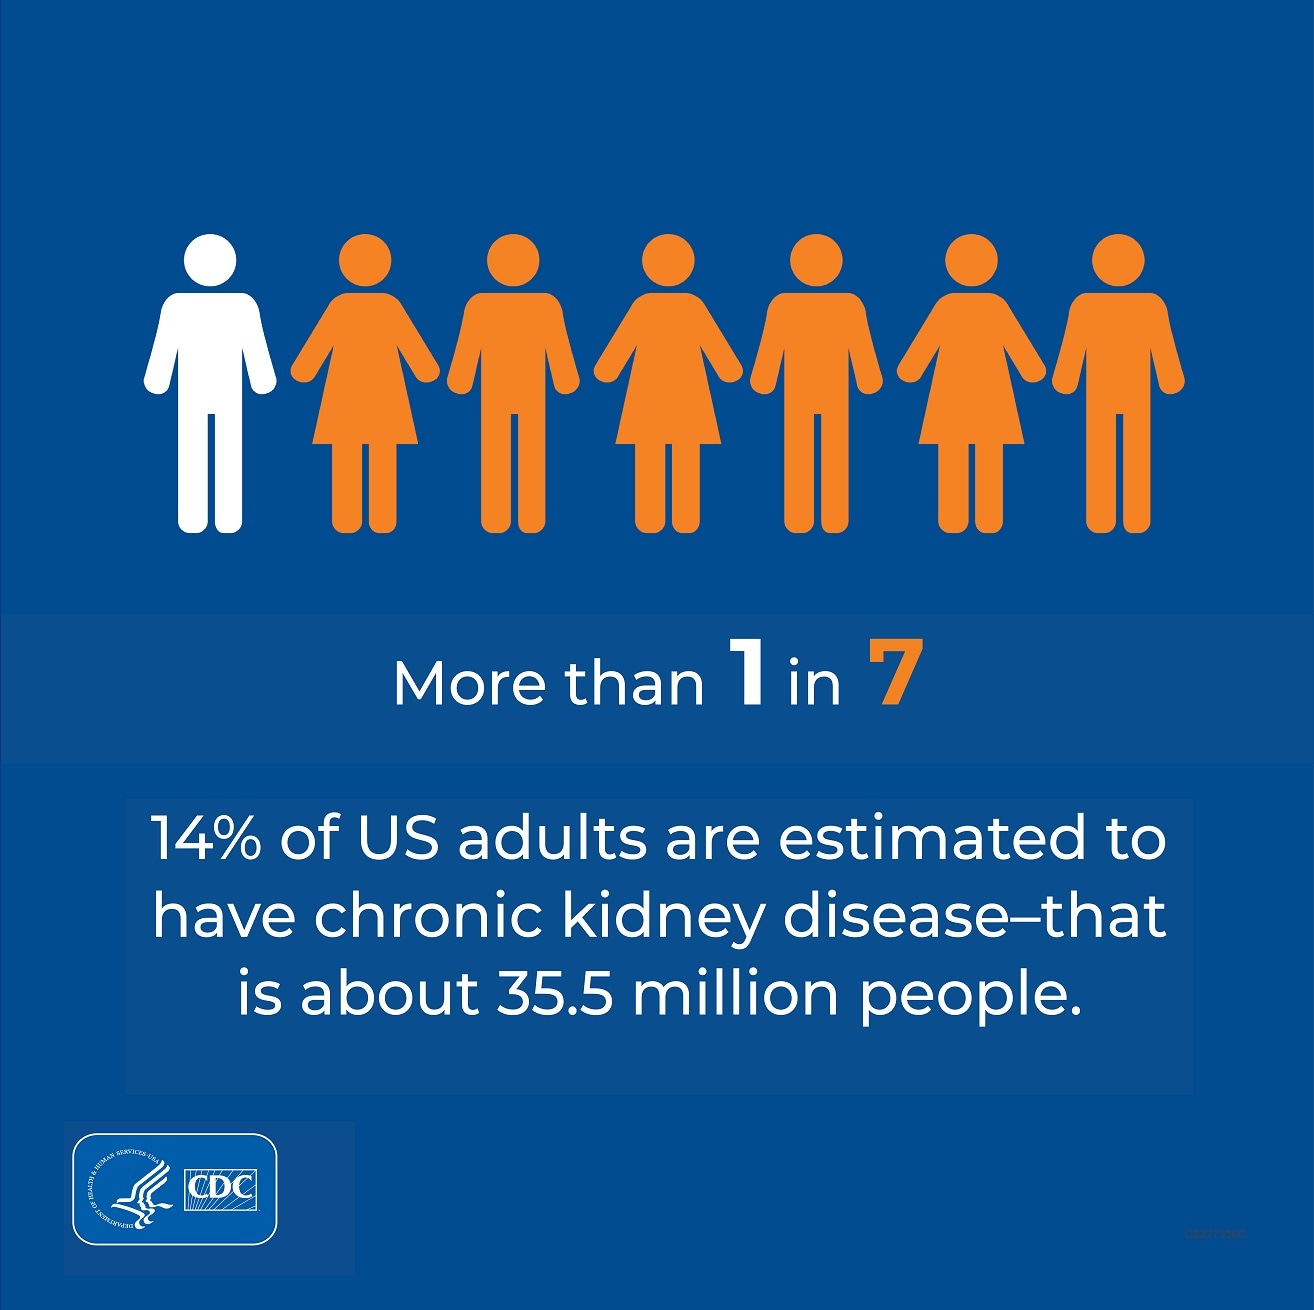 15% of United States adults, more than 1 in 7, are estimated to have chronic kidney disease. That is about 37 million people. 